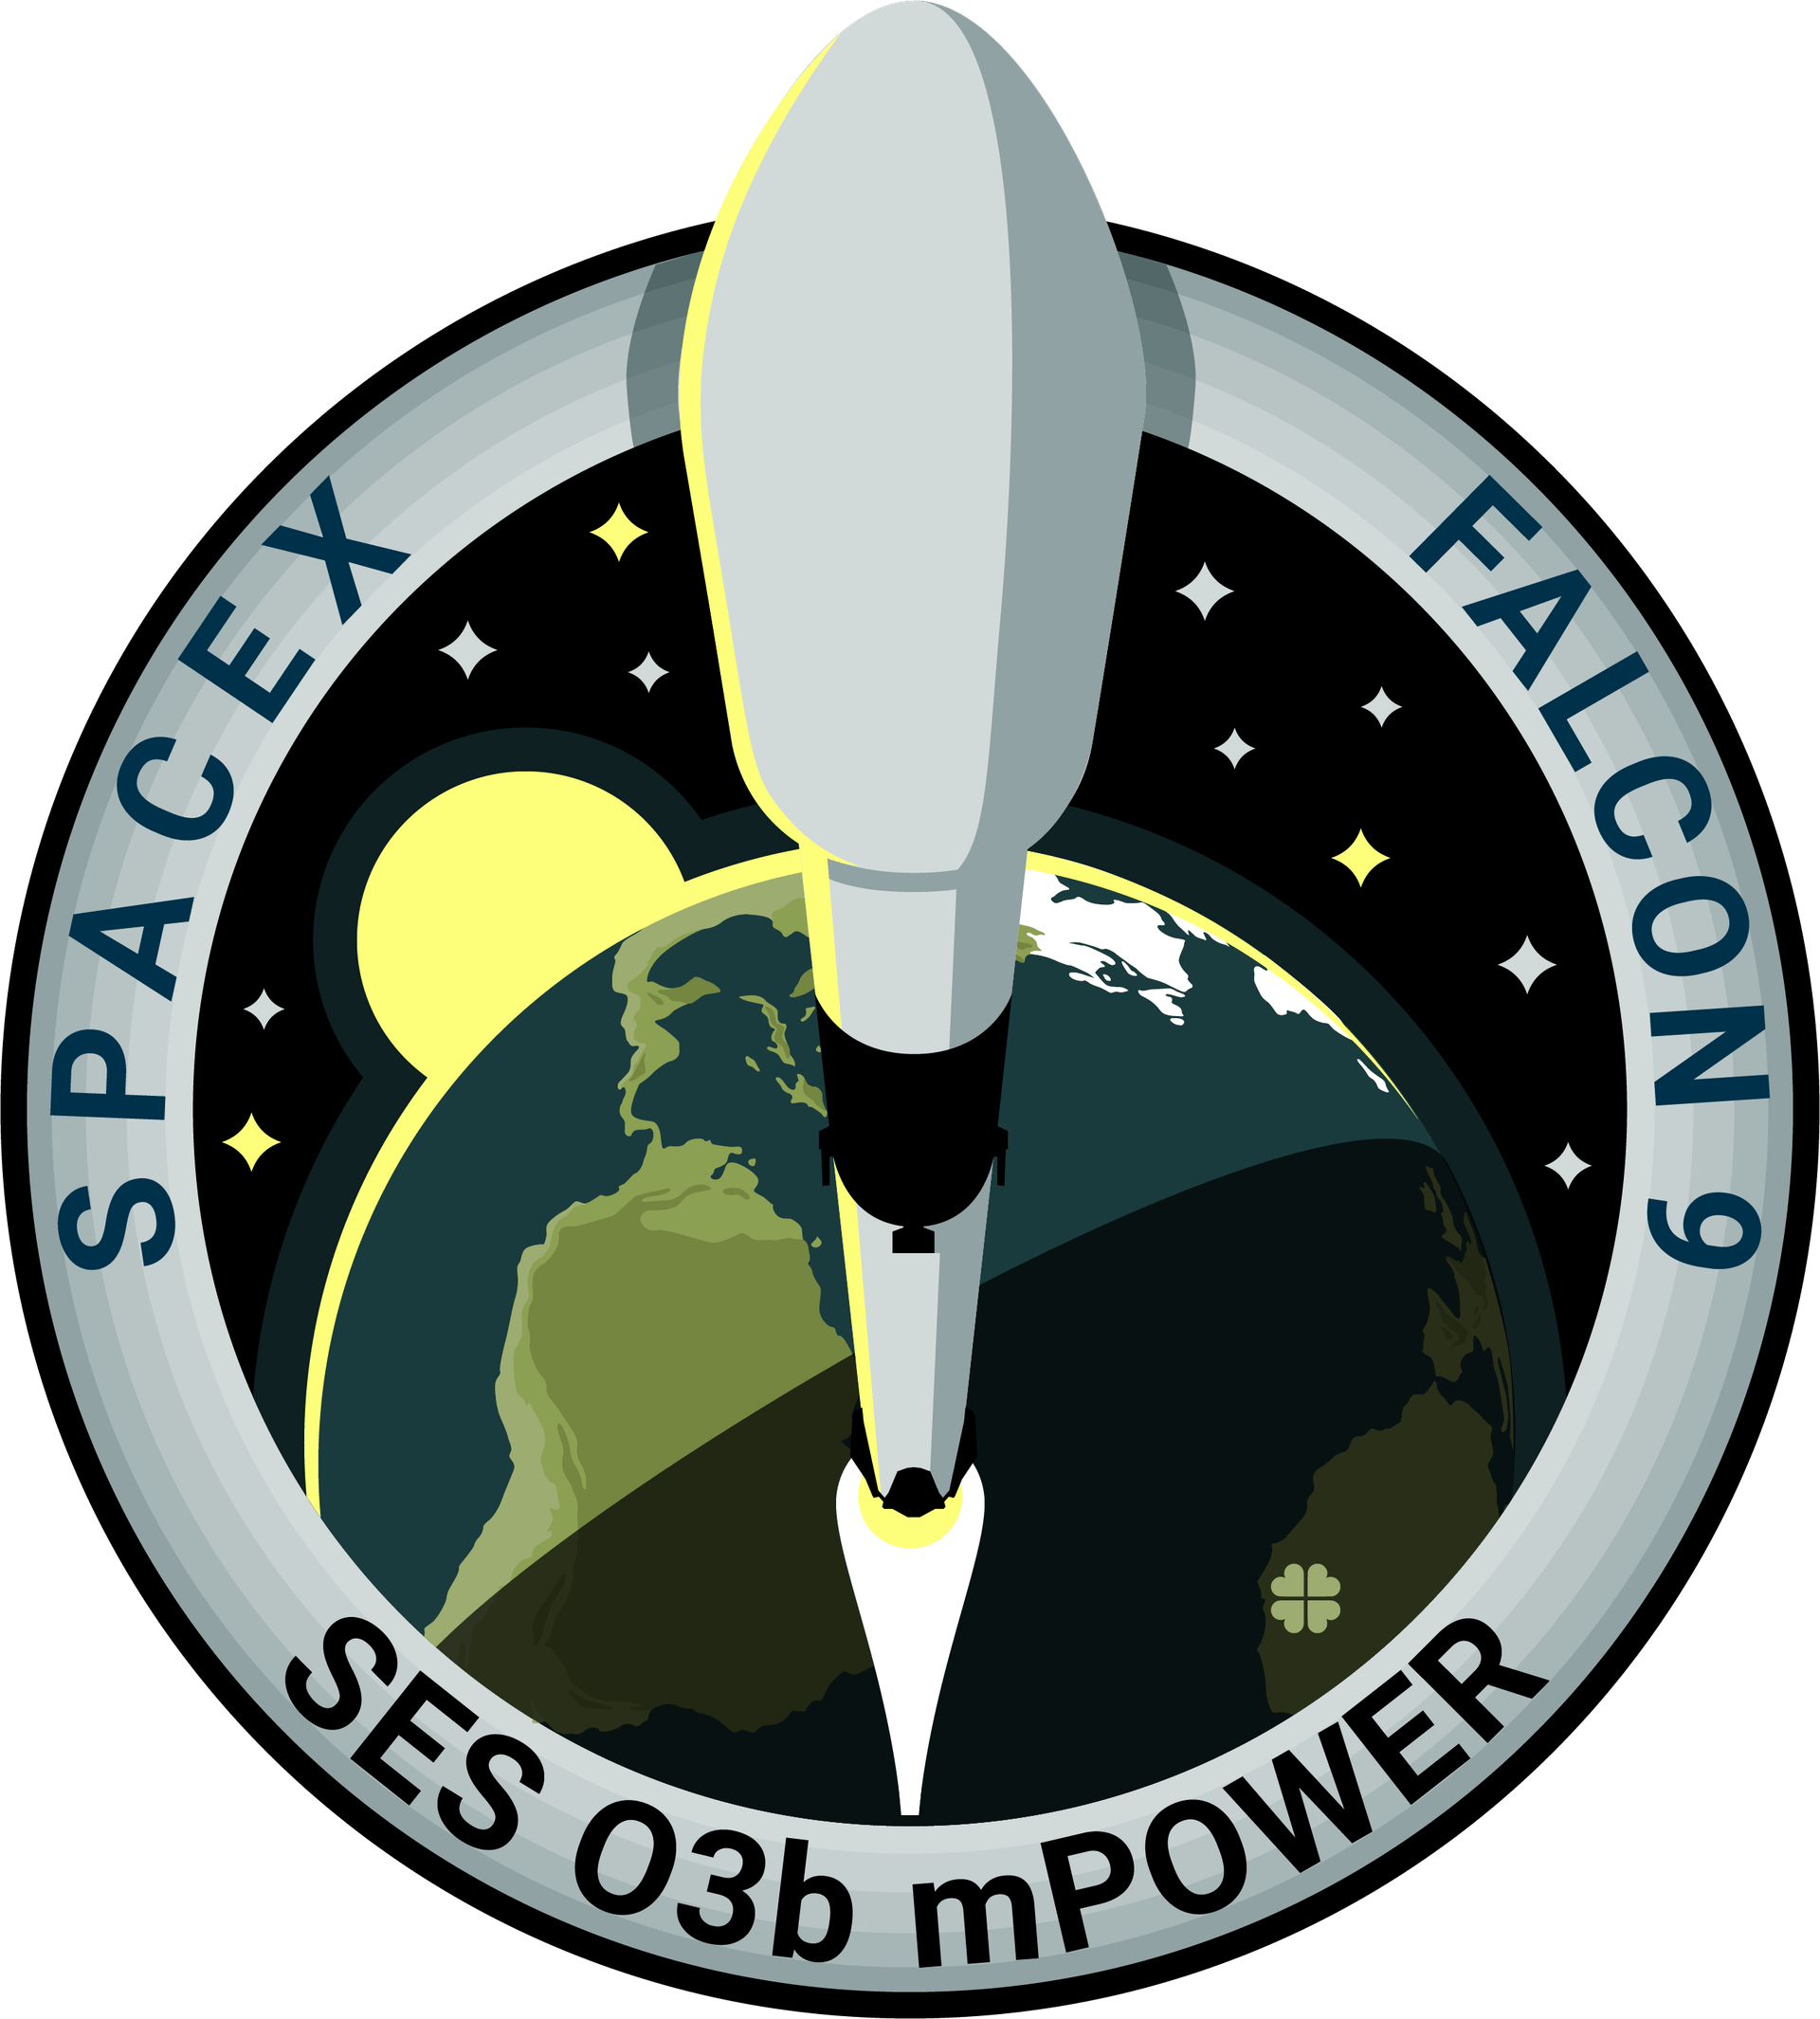 Mission patch for O3b mPower 5 & 6